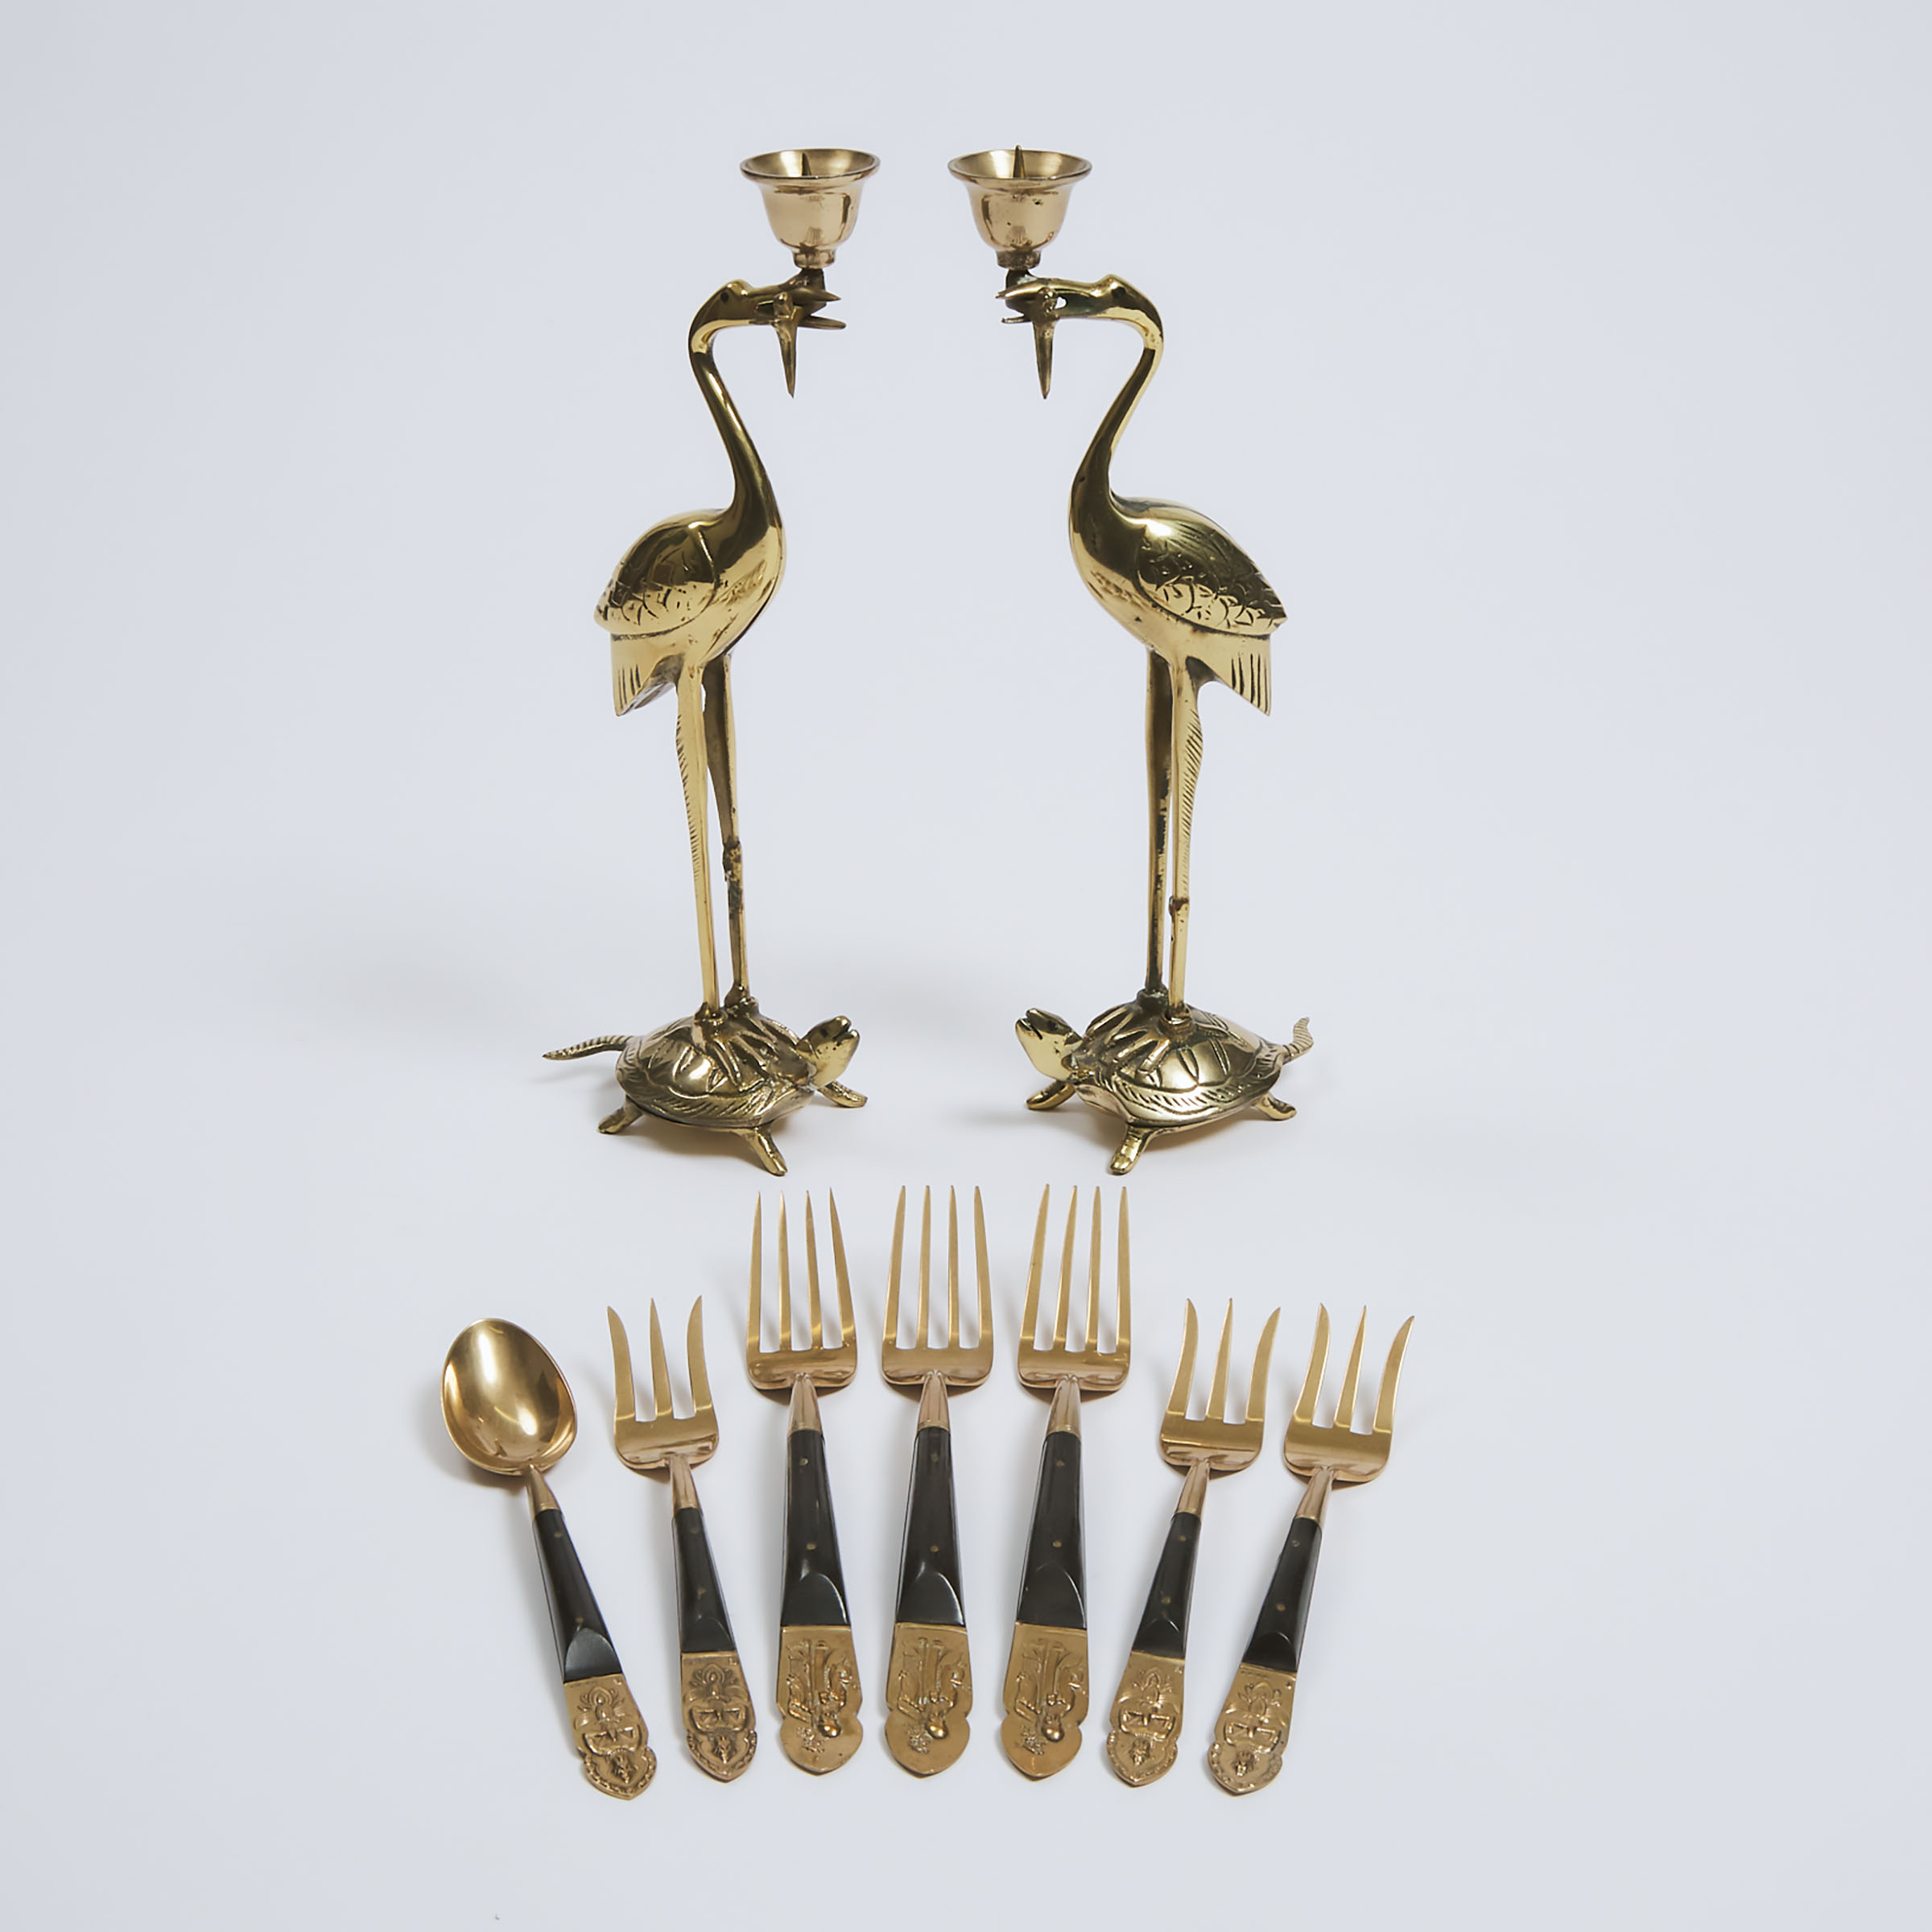 A Pair of Brass 'Longevity' Crane Candle Holders, Together With a Set of Gold-Plated and Horn-Inlaid Utensils, 20th Century 